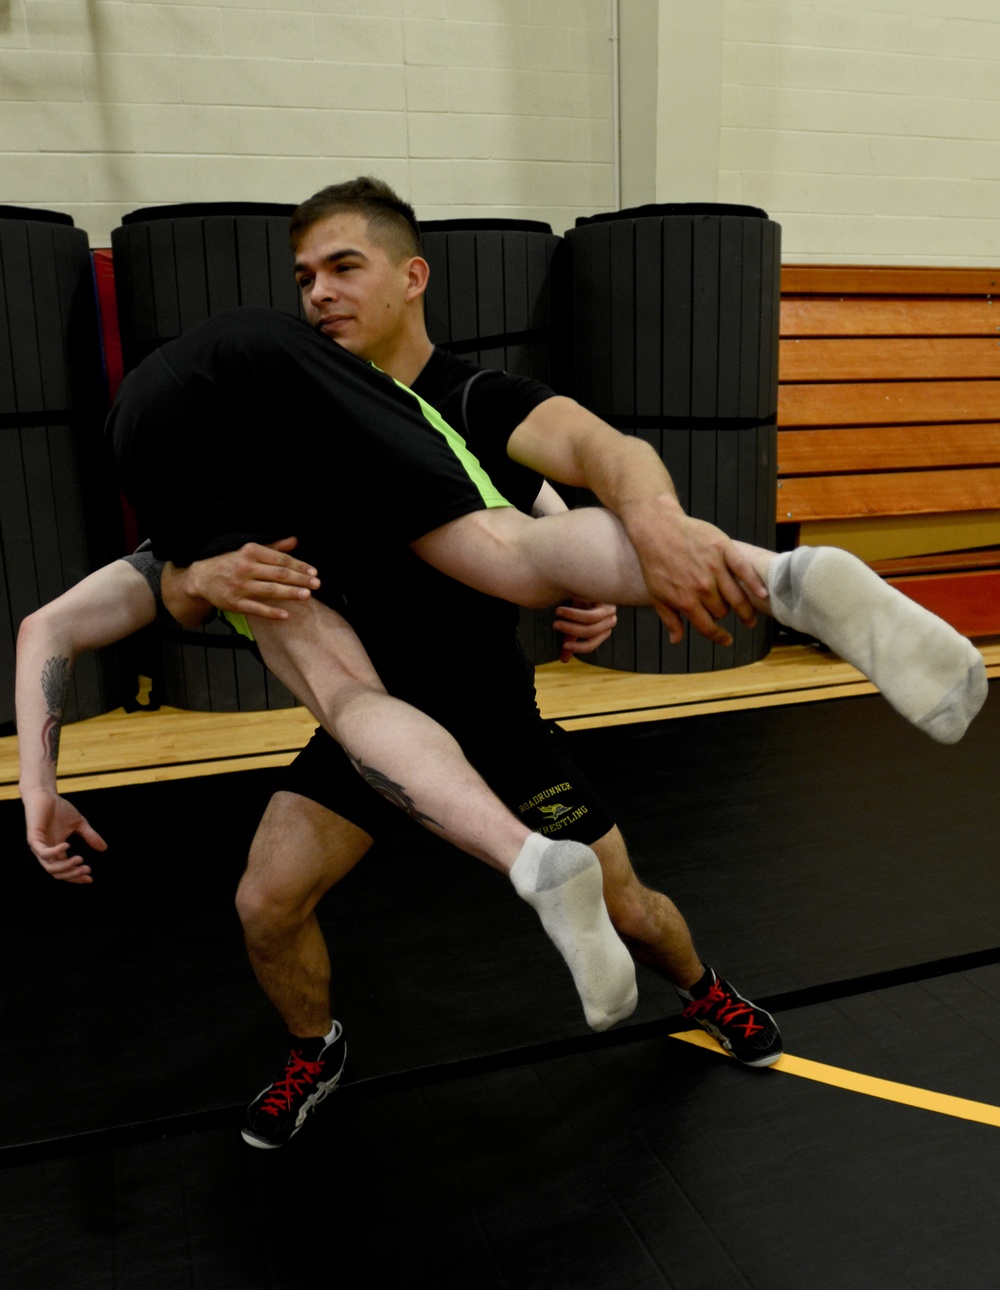 Arrowhead Soldier set to compete for All-Army Wrestling spot